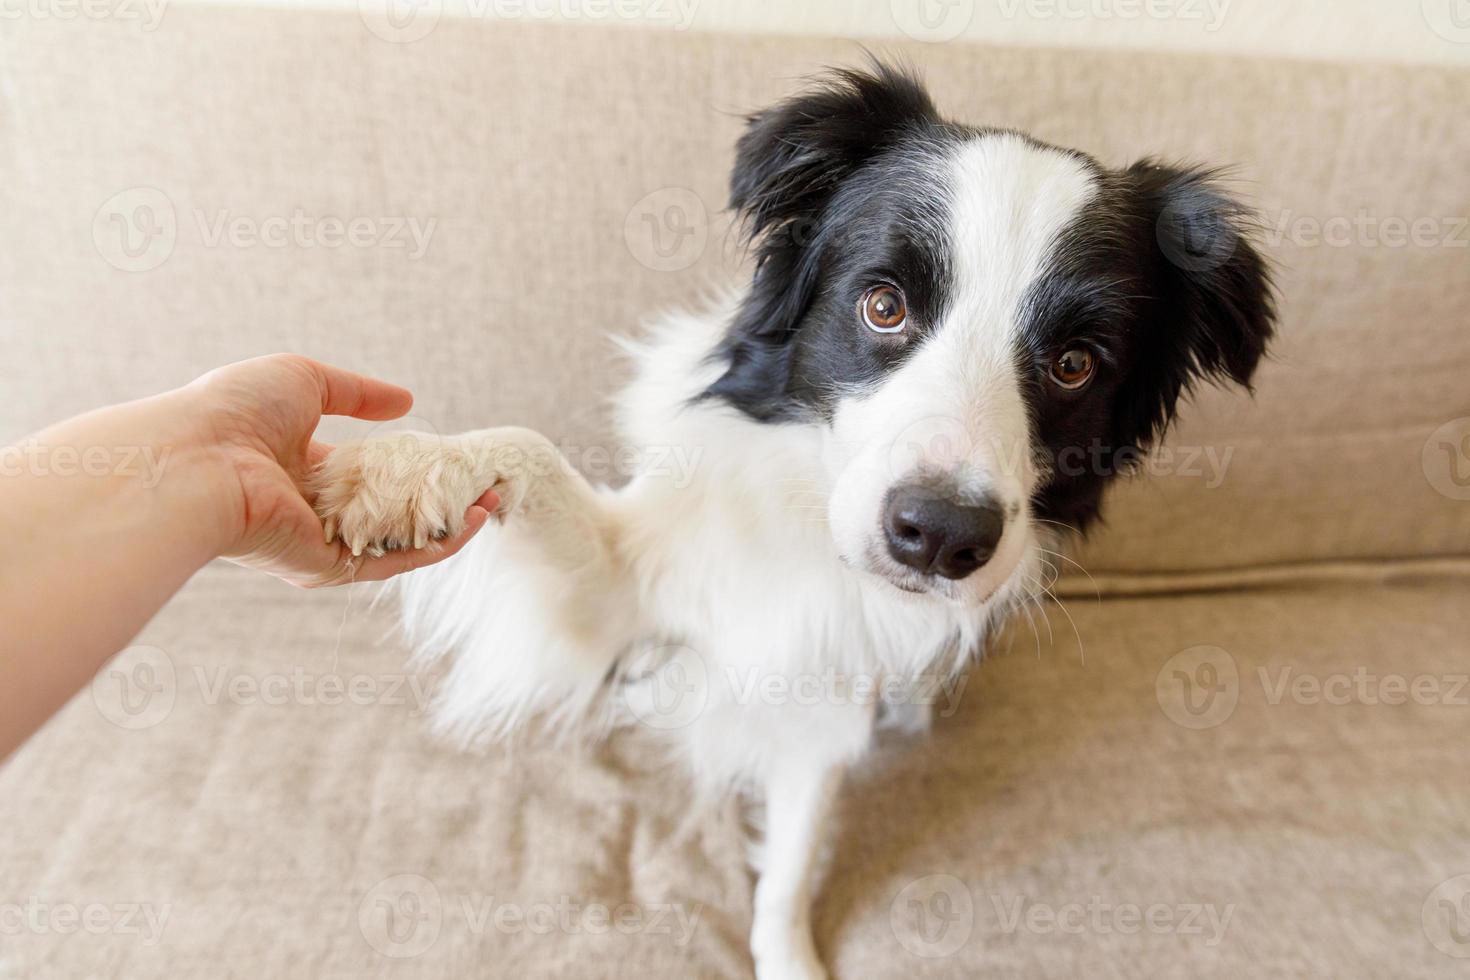 Funny portrait of cute puppy dog border collie on couch giving paw. Dog paw and human hand doing handshake. Owner training trick with dog friend at home indoors. friendship love support team concept. photo